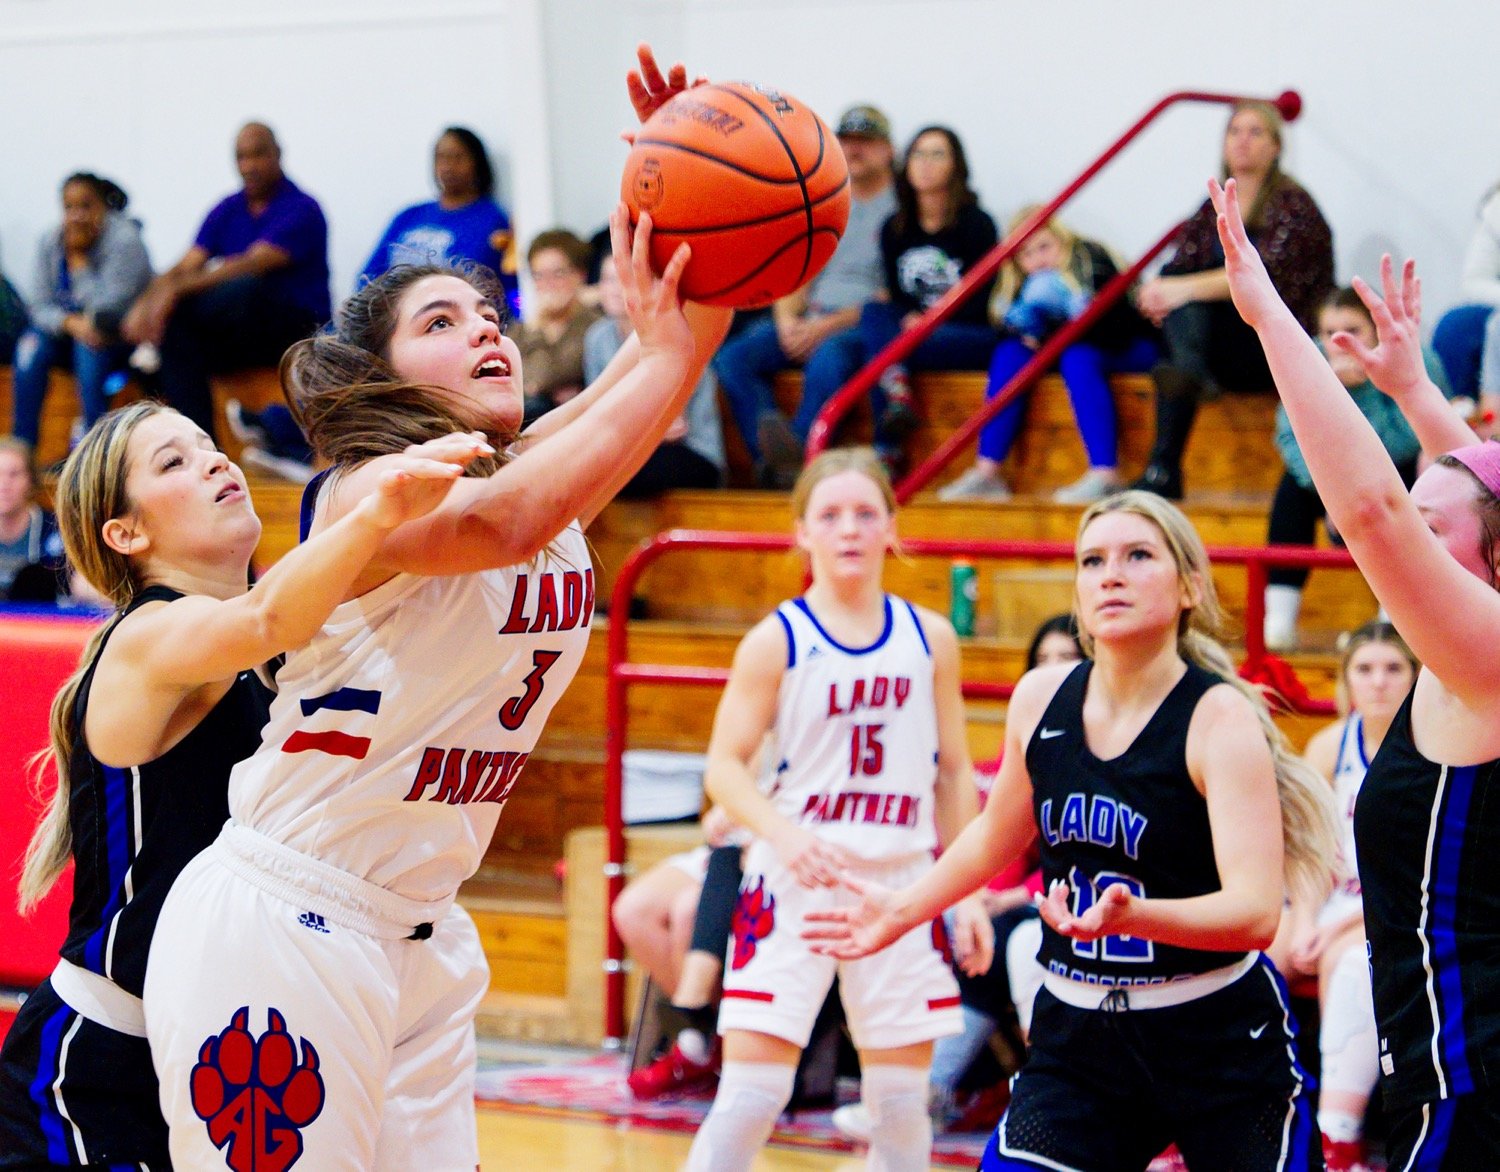 Erin Langston puts up a shot in the lane while being fouled. [see more shots, buy basketball photos]